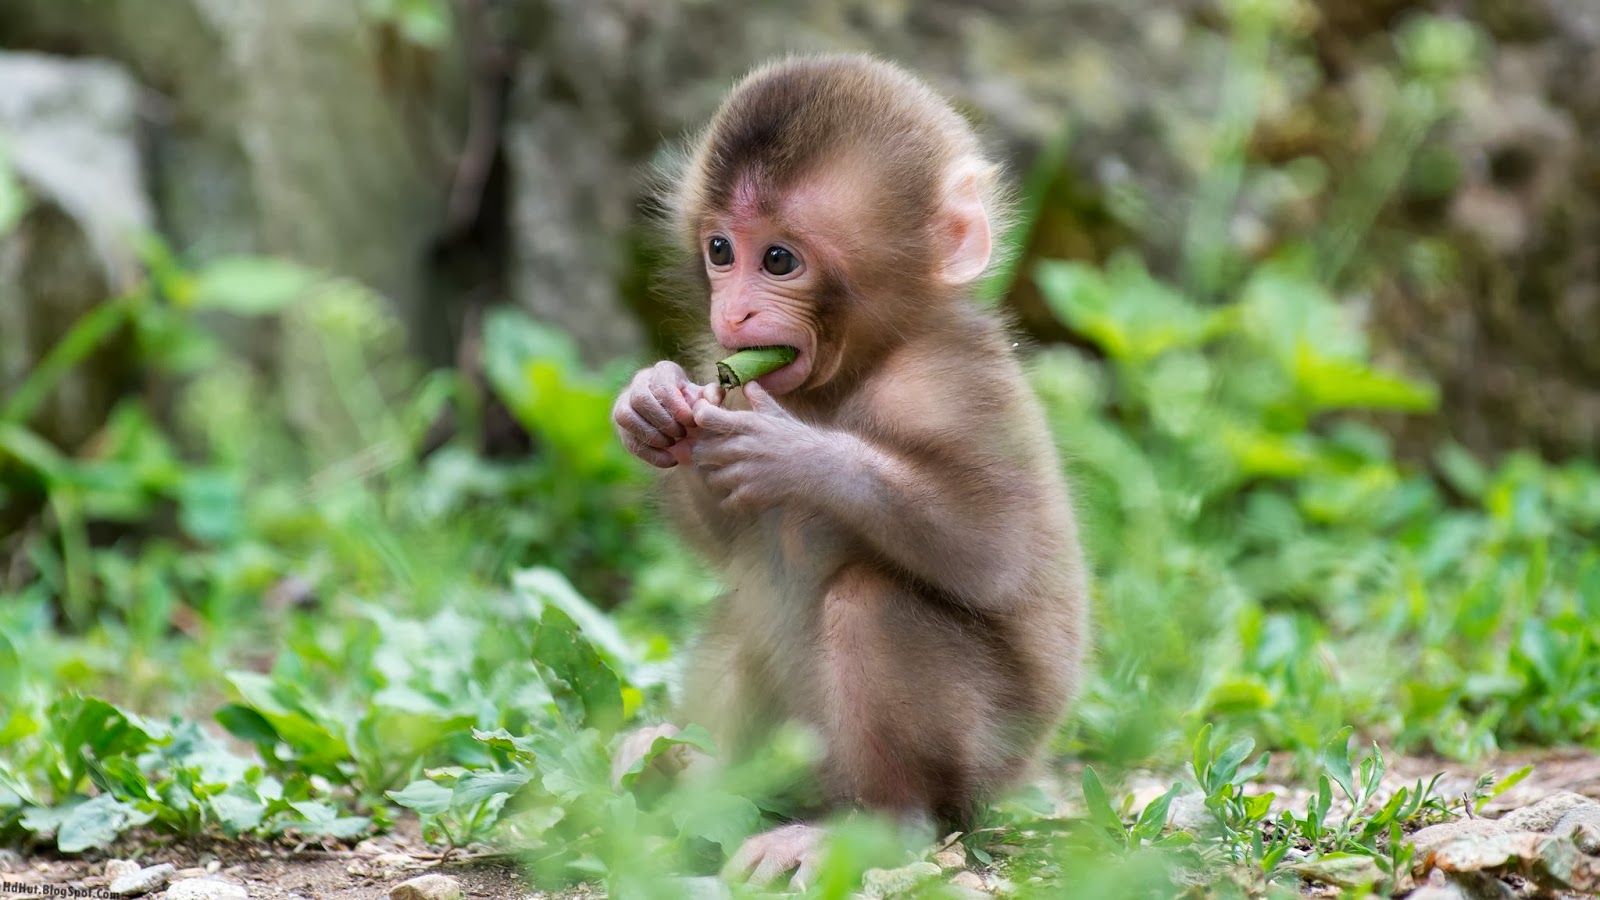 Cute And Beautiful Monkey Wallpaper In HD Pictures